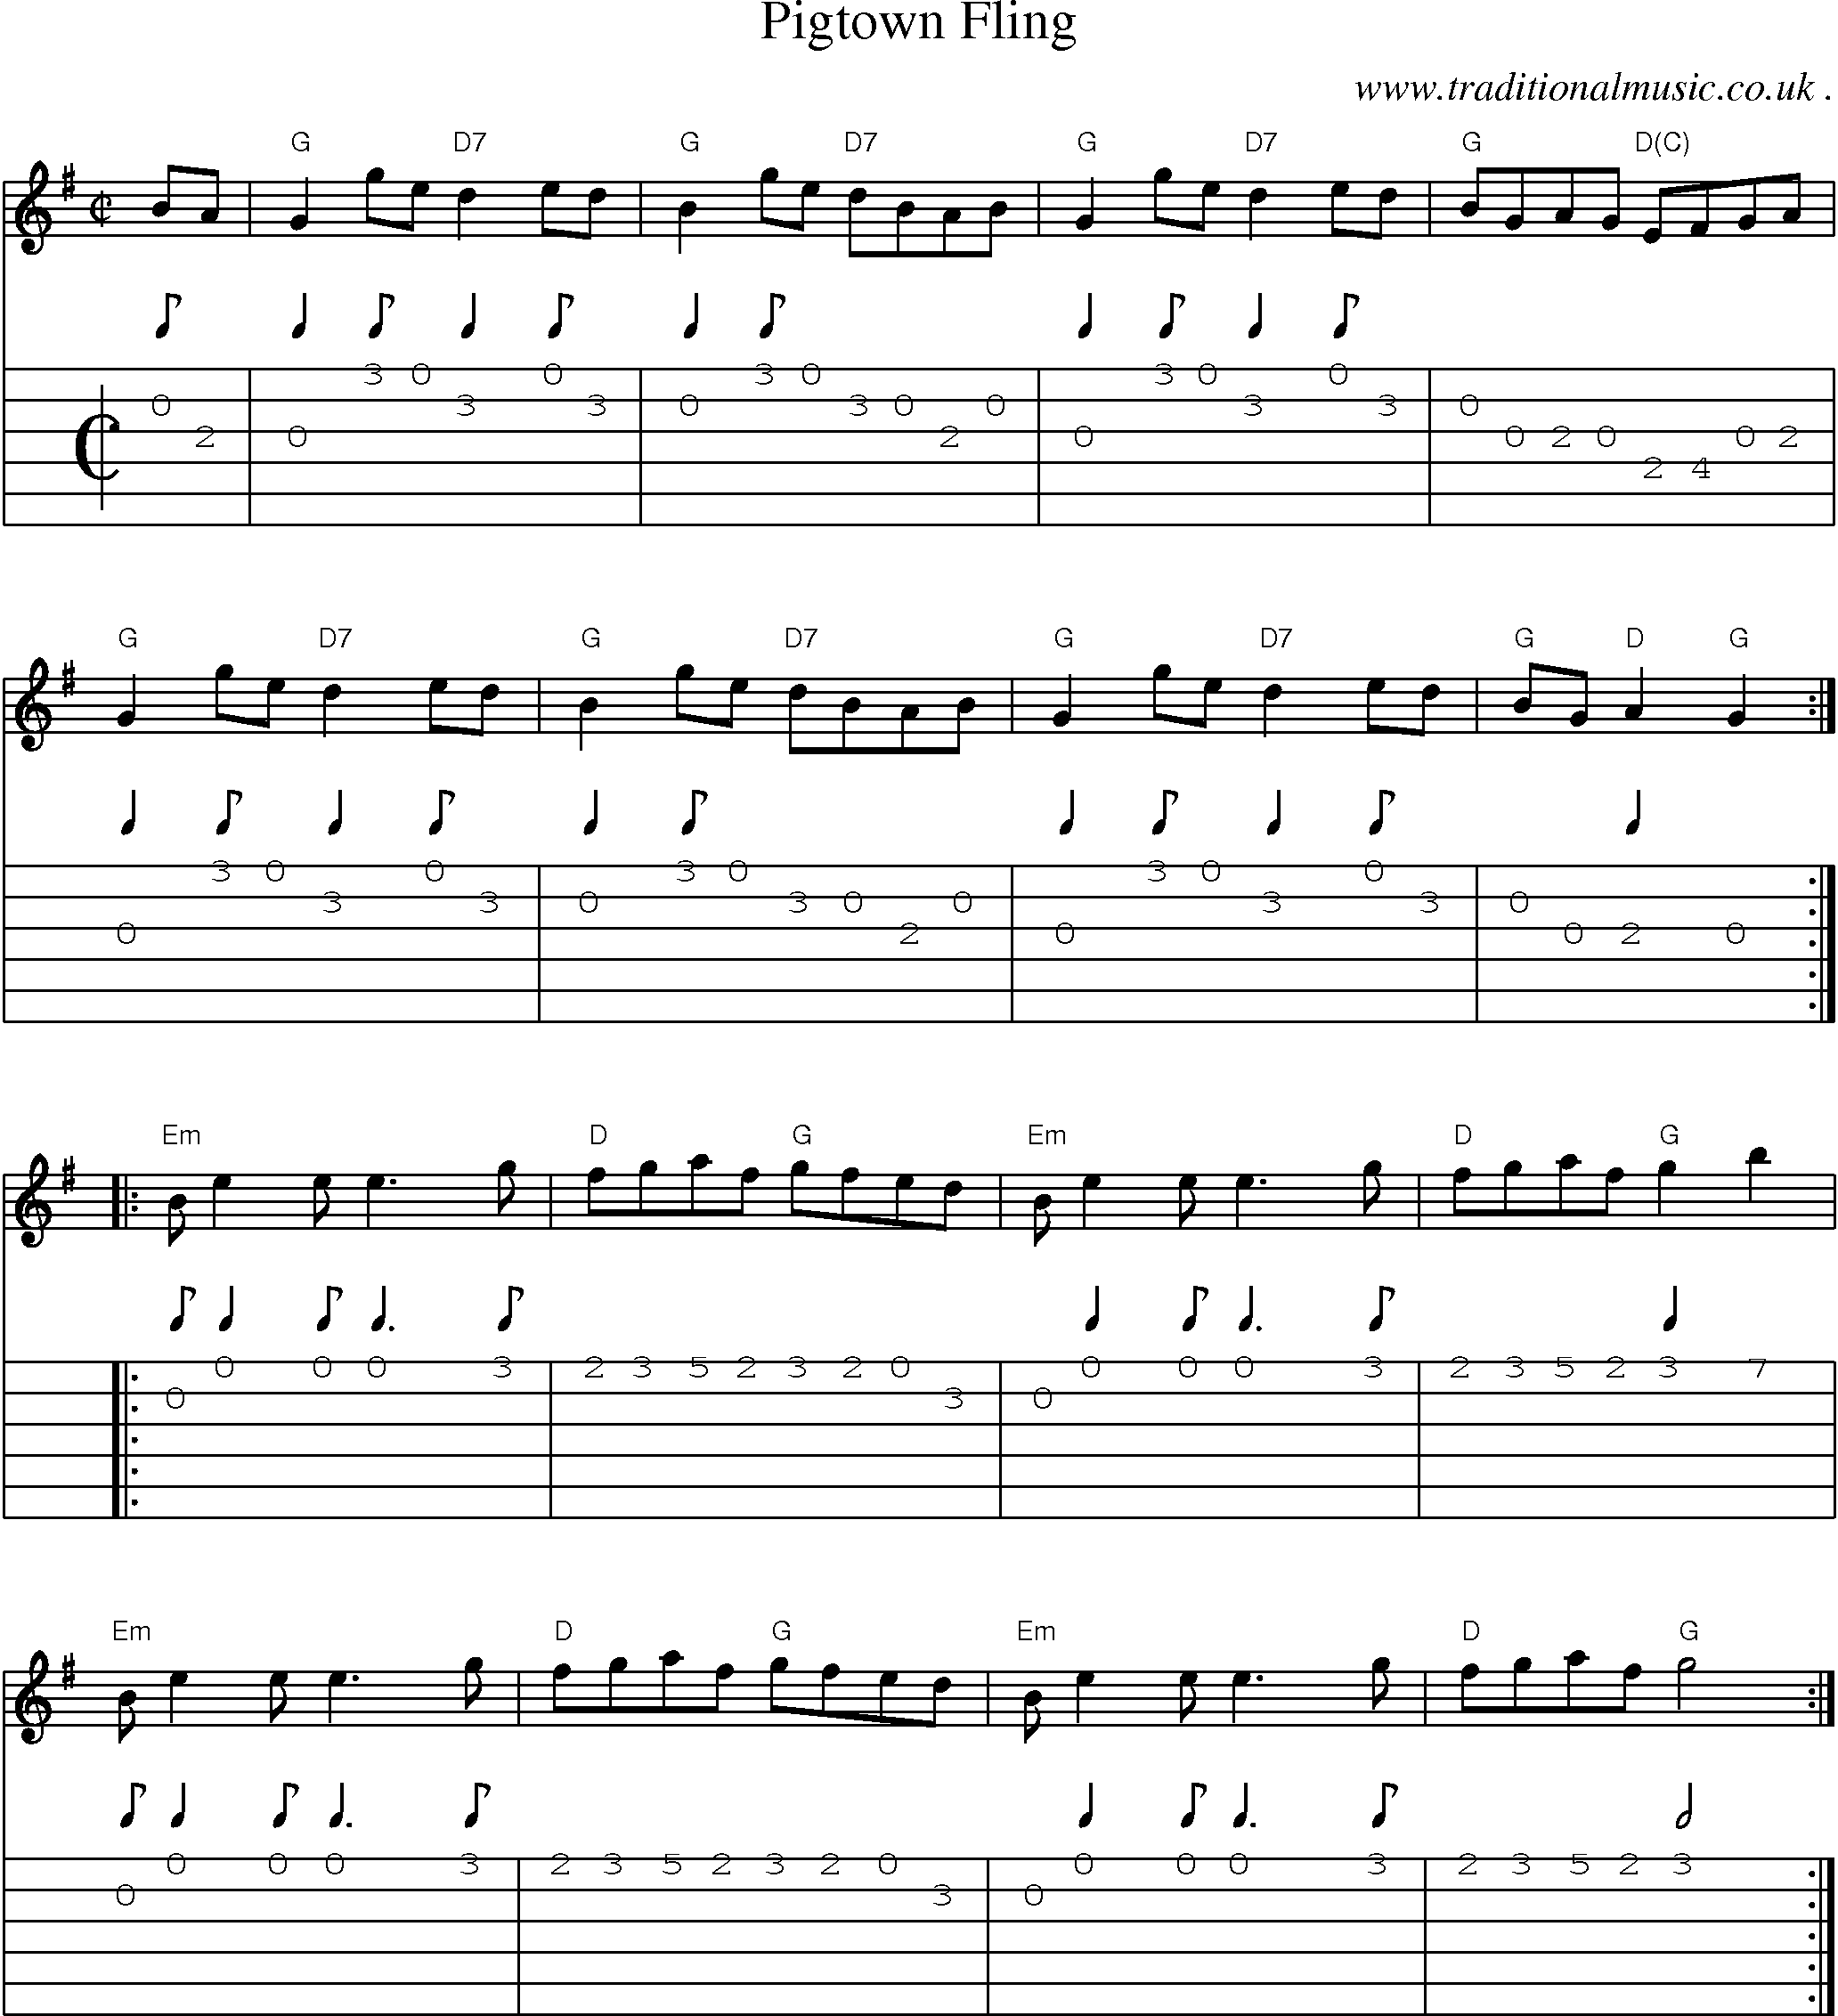 Music Score and Guitar Tabs for Pigtown Fling